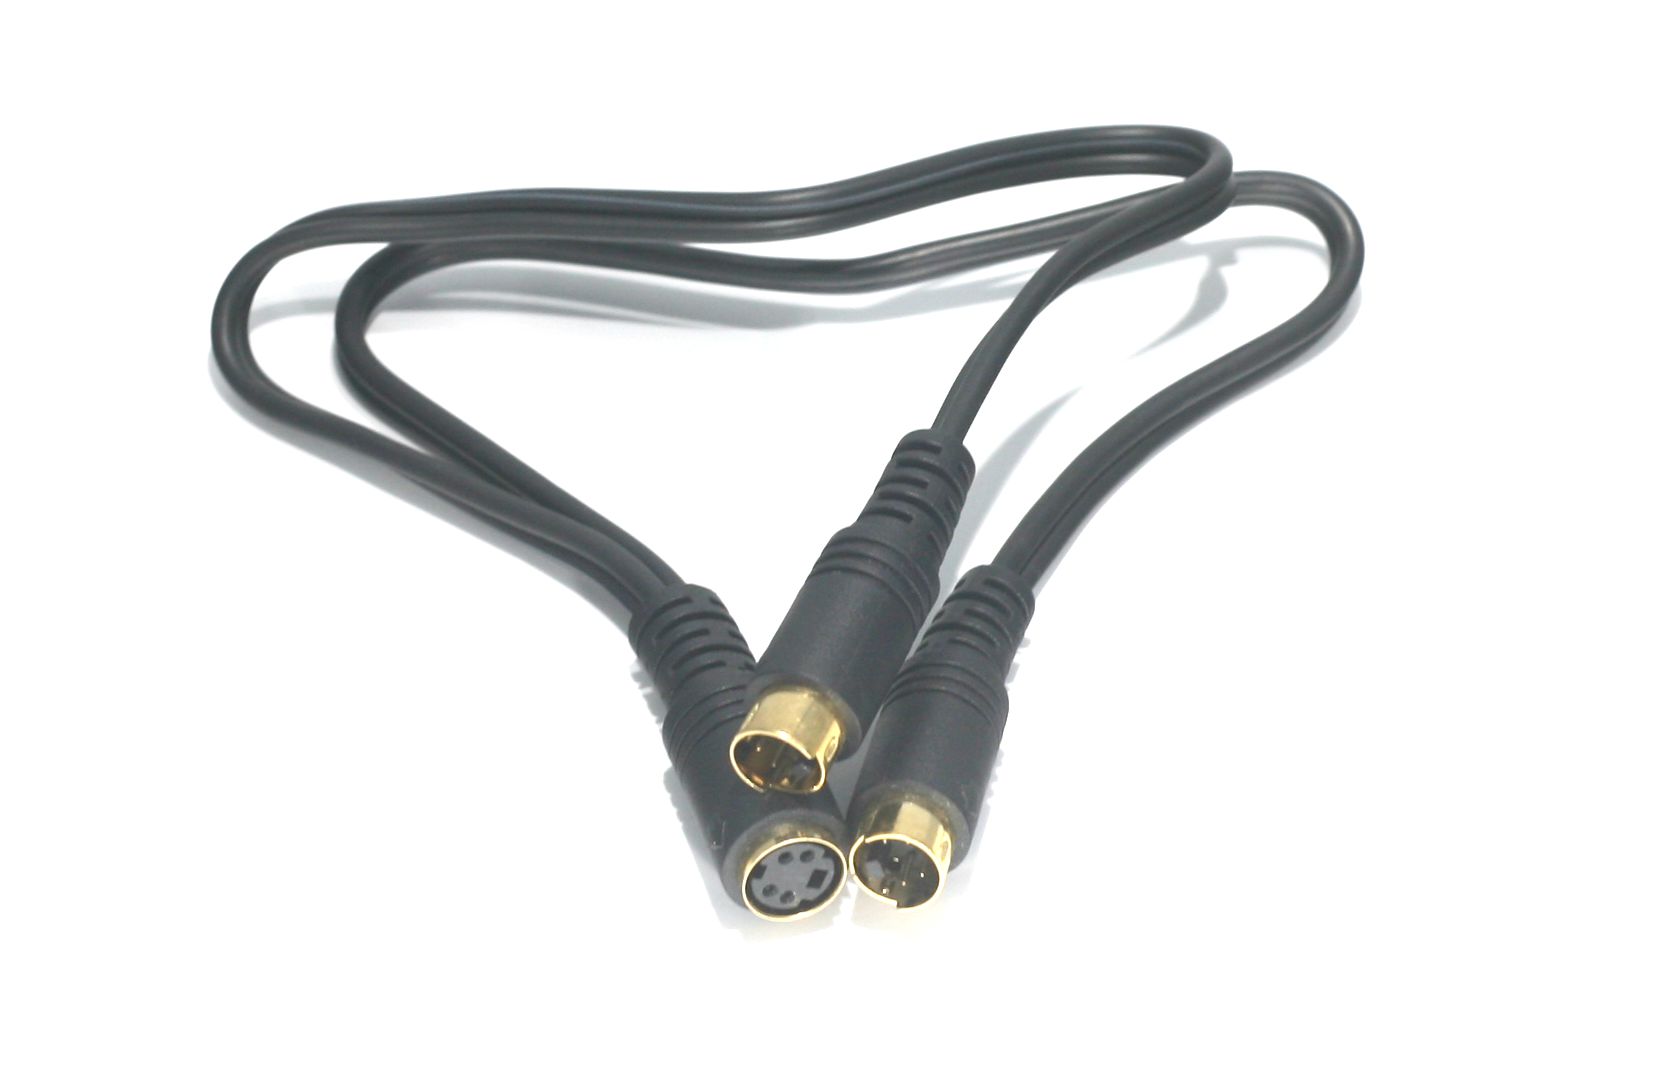 SVHS SVideo Splitter Cable 4PIN MINI Male to Male to Female 12Inch